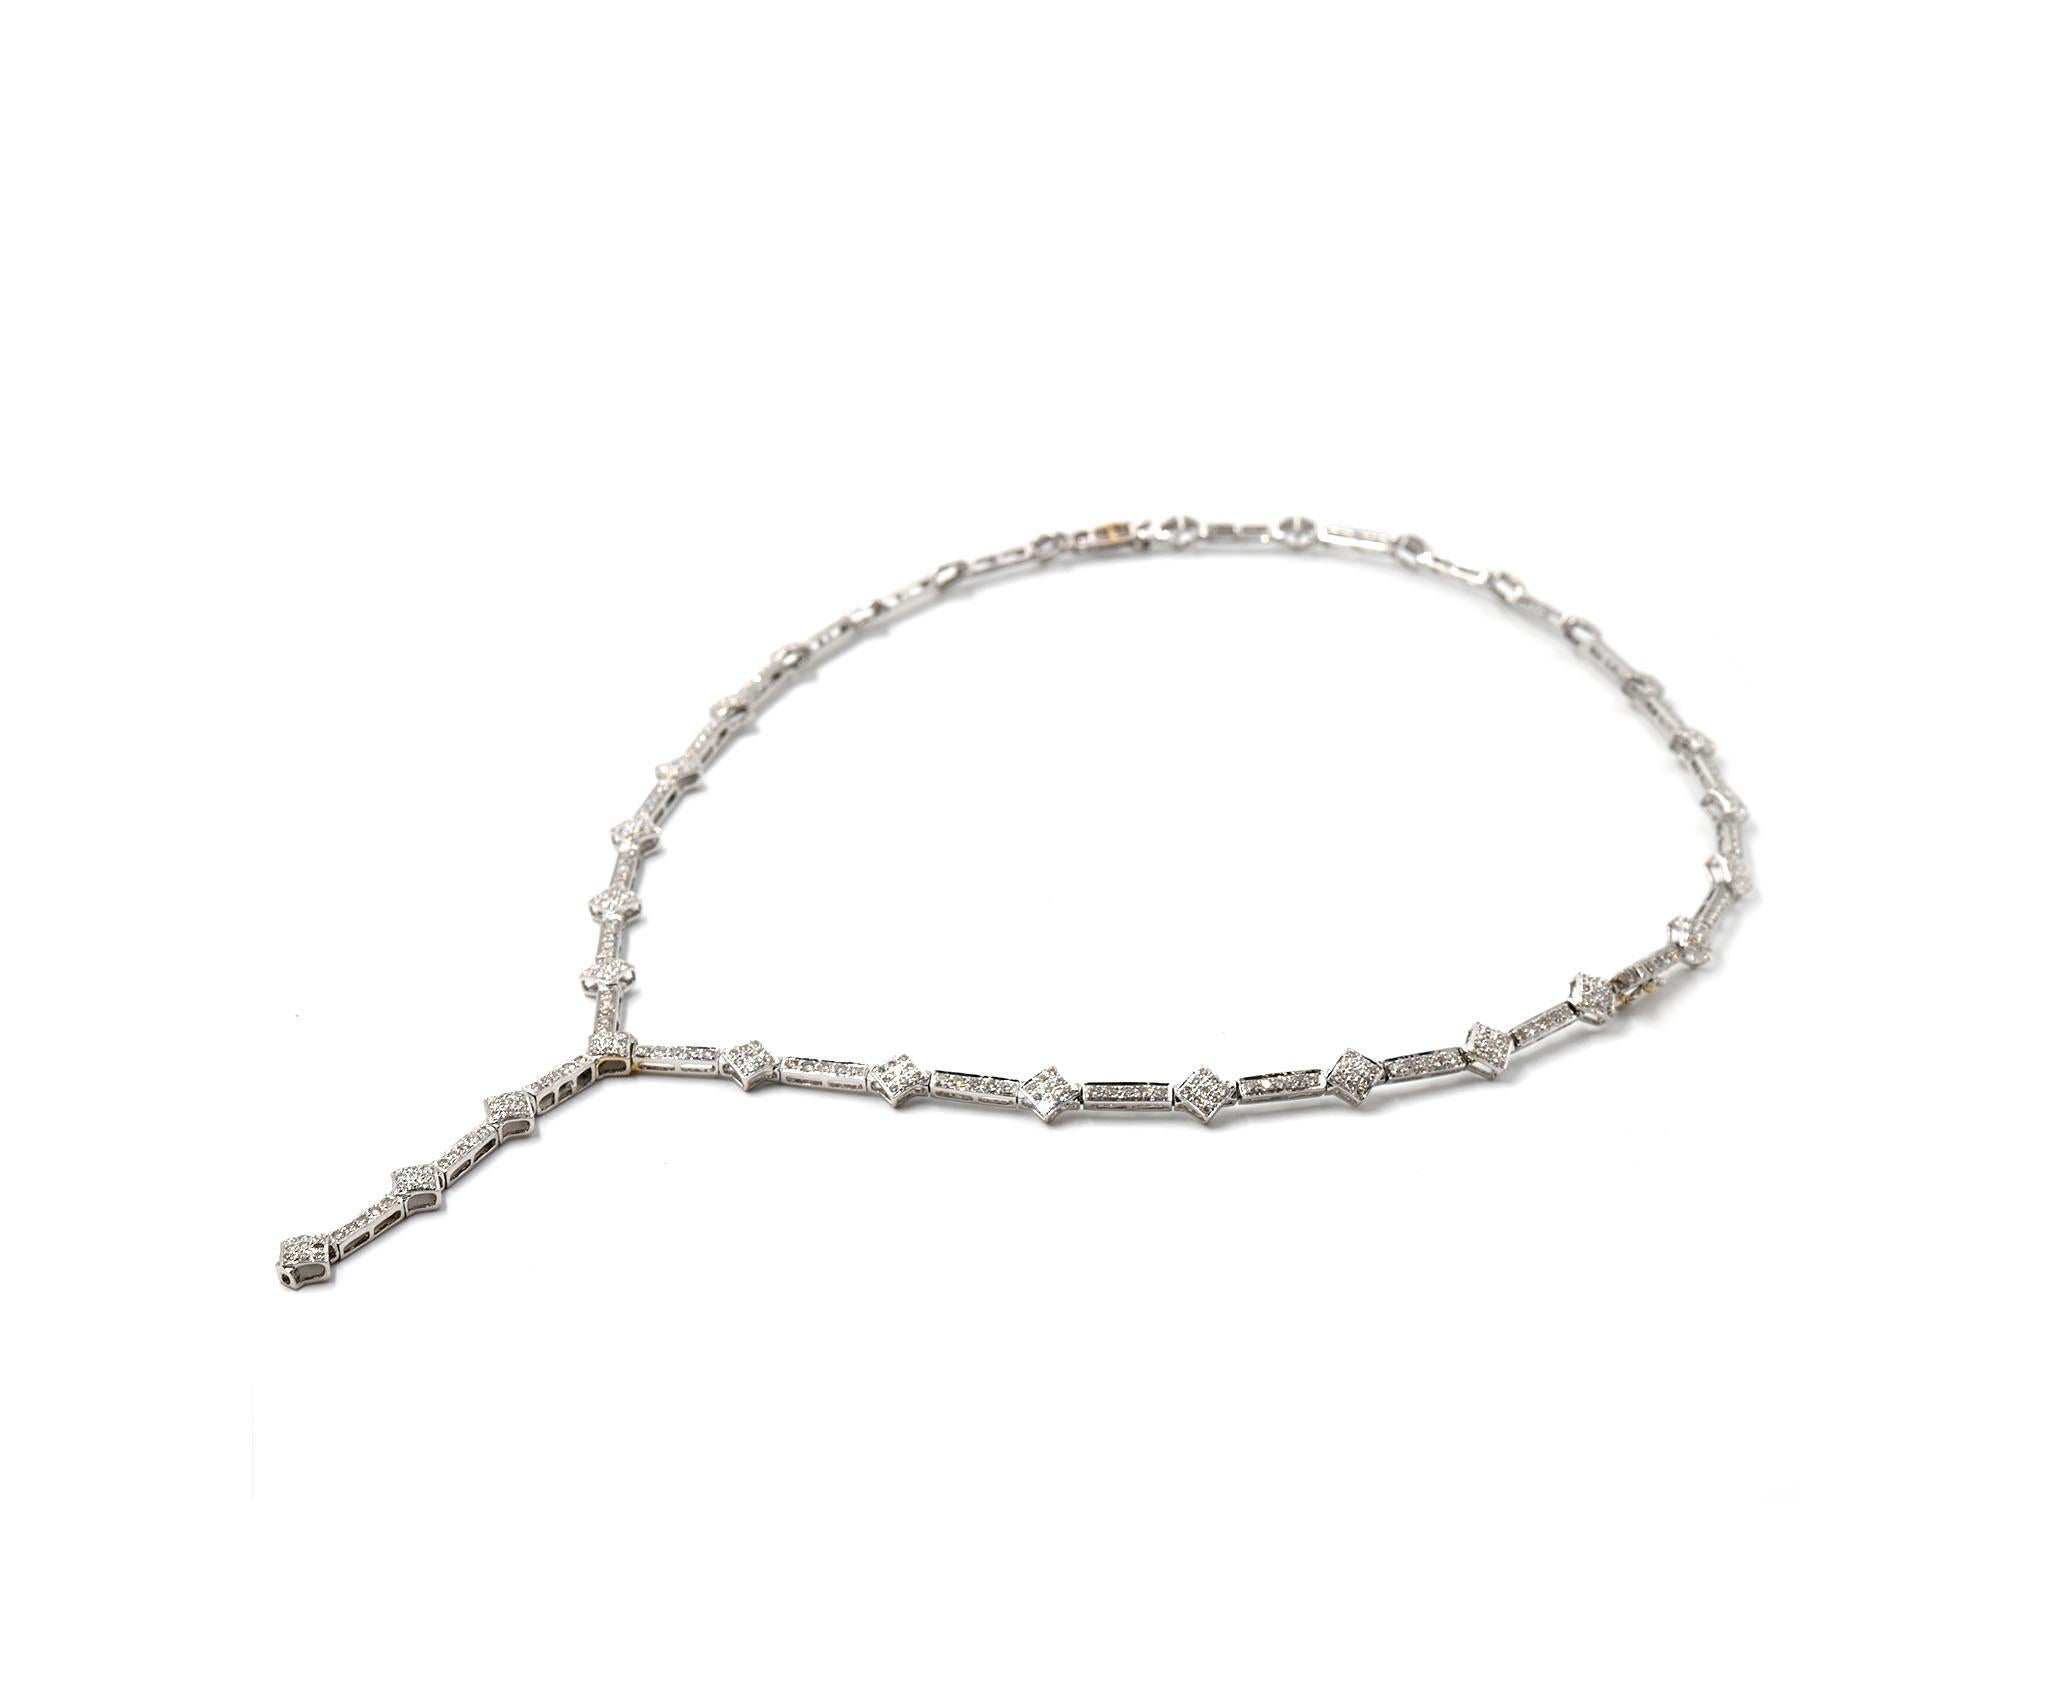 Designer: custom design
Material: 18k white gold
Diamonds: round brilliant cut = 5.70 carat total weight
Color: H
Clarity: SI1
Dimensions: necklace is 22-inch long
Weight: 29.79 grams
